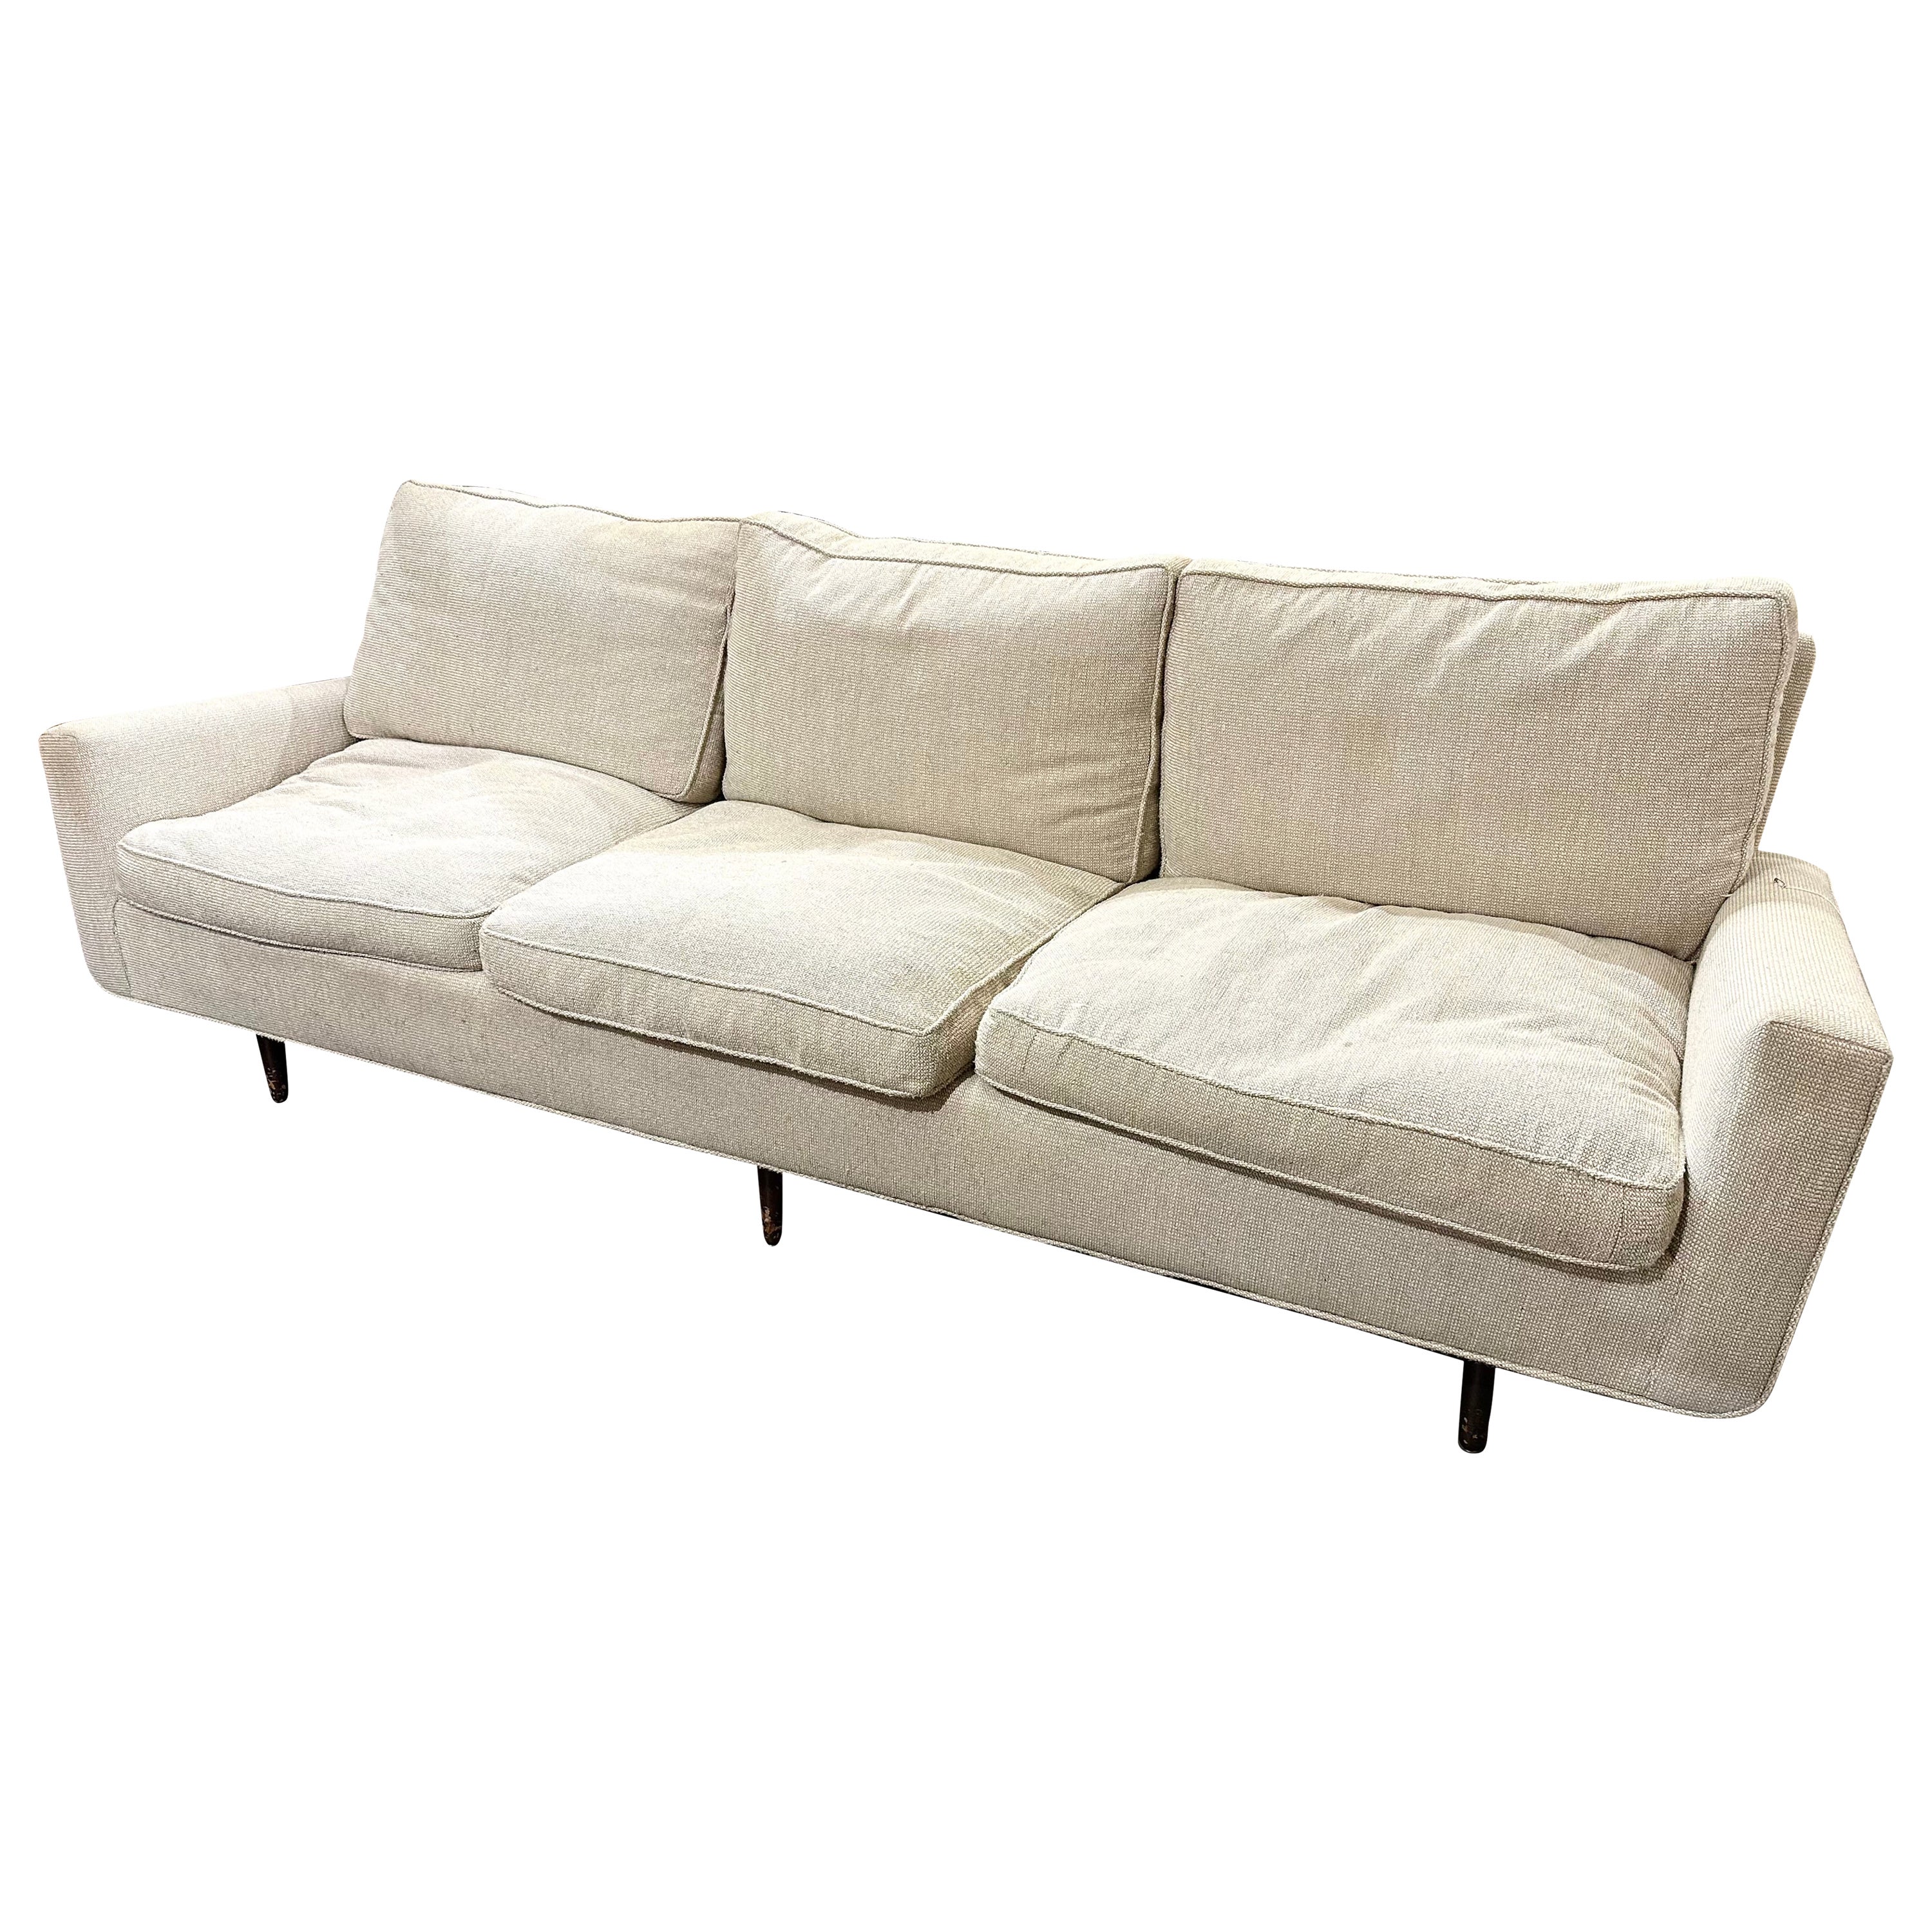 Early Florence Knoll 3-Seat Model 26 Sofa